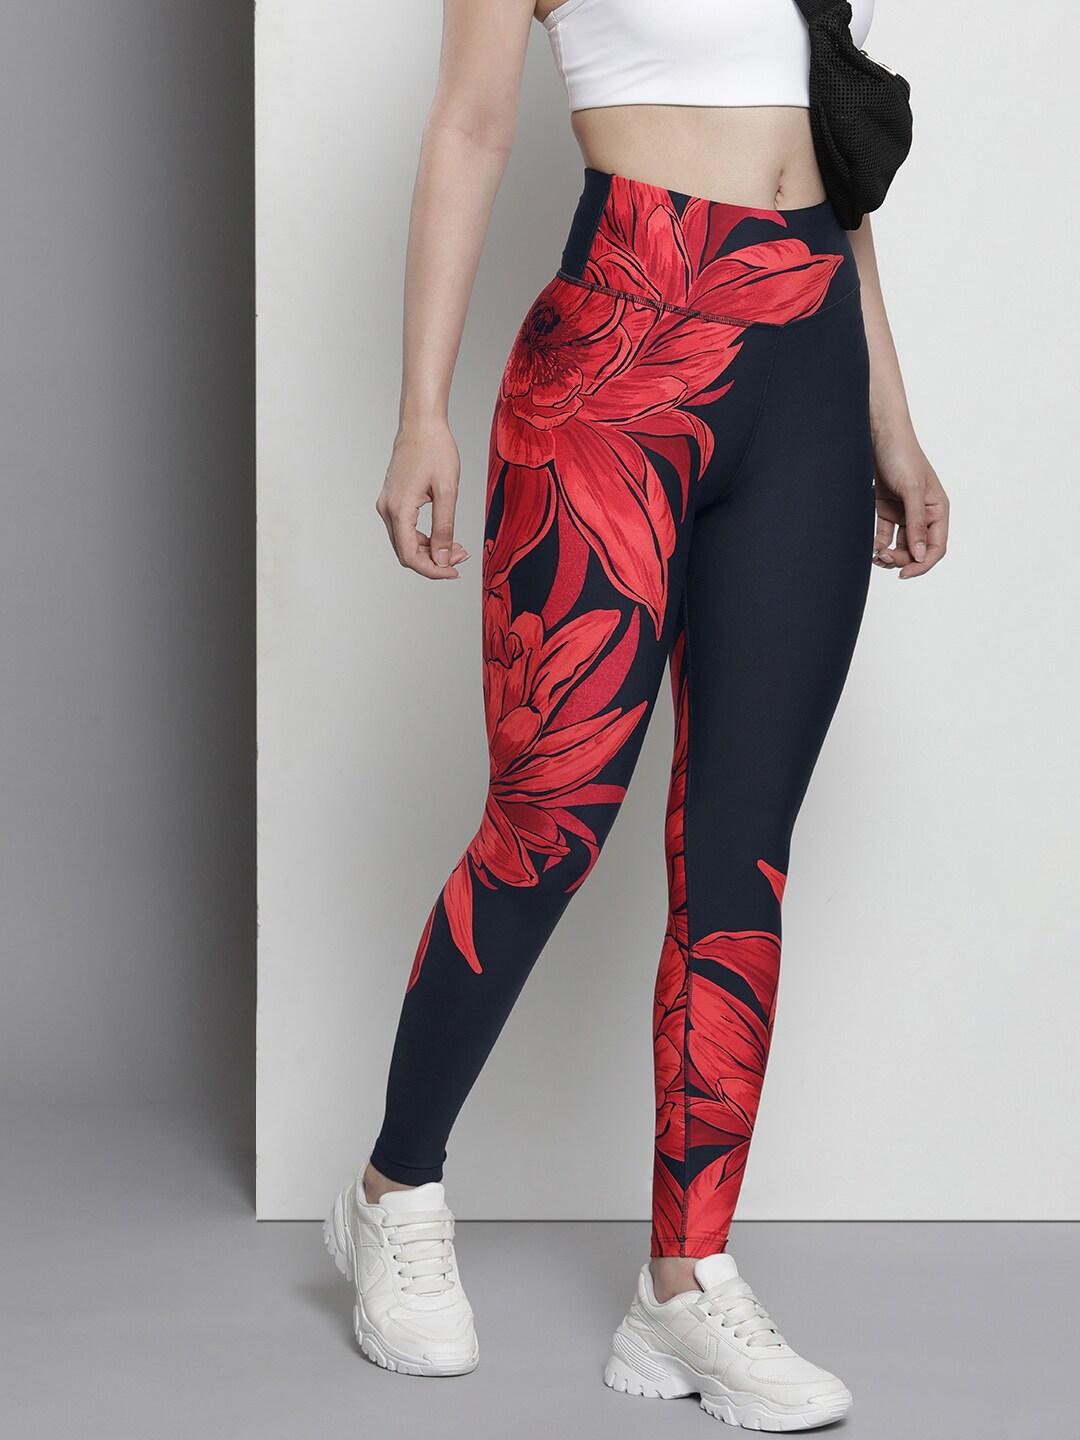 tommy hilfiger women red and black floral printed aop tights